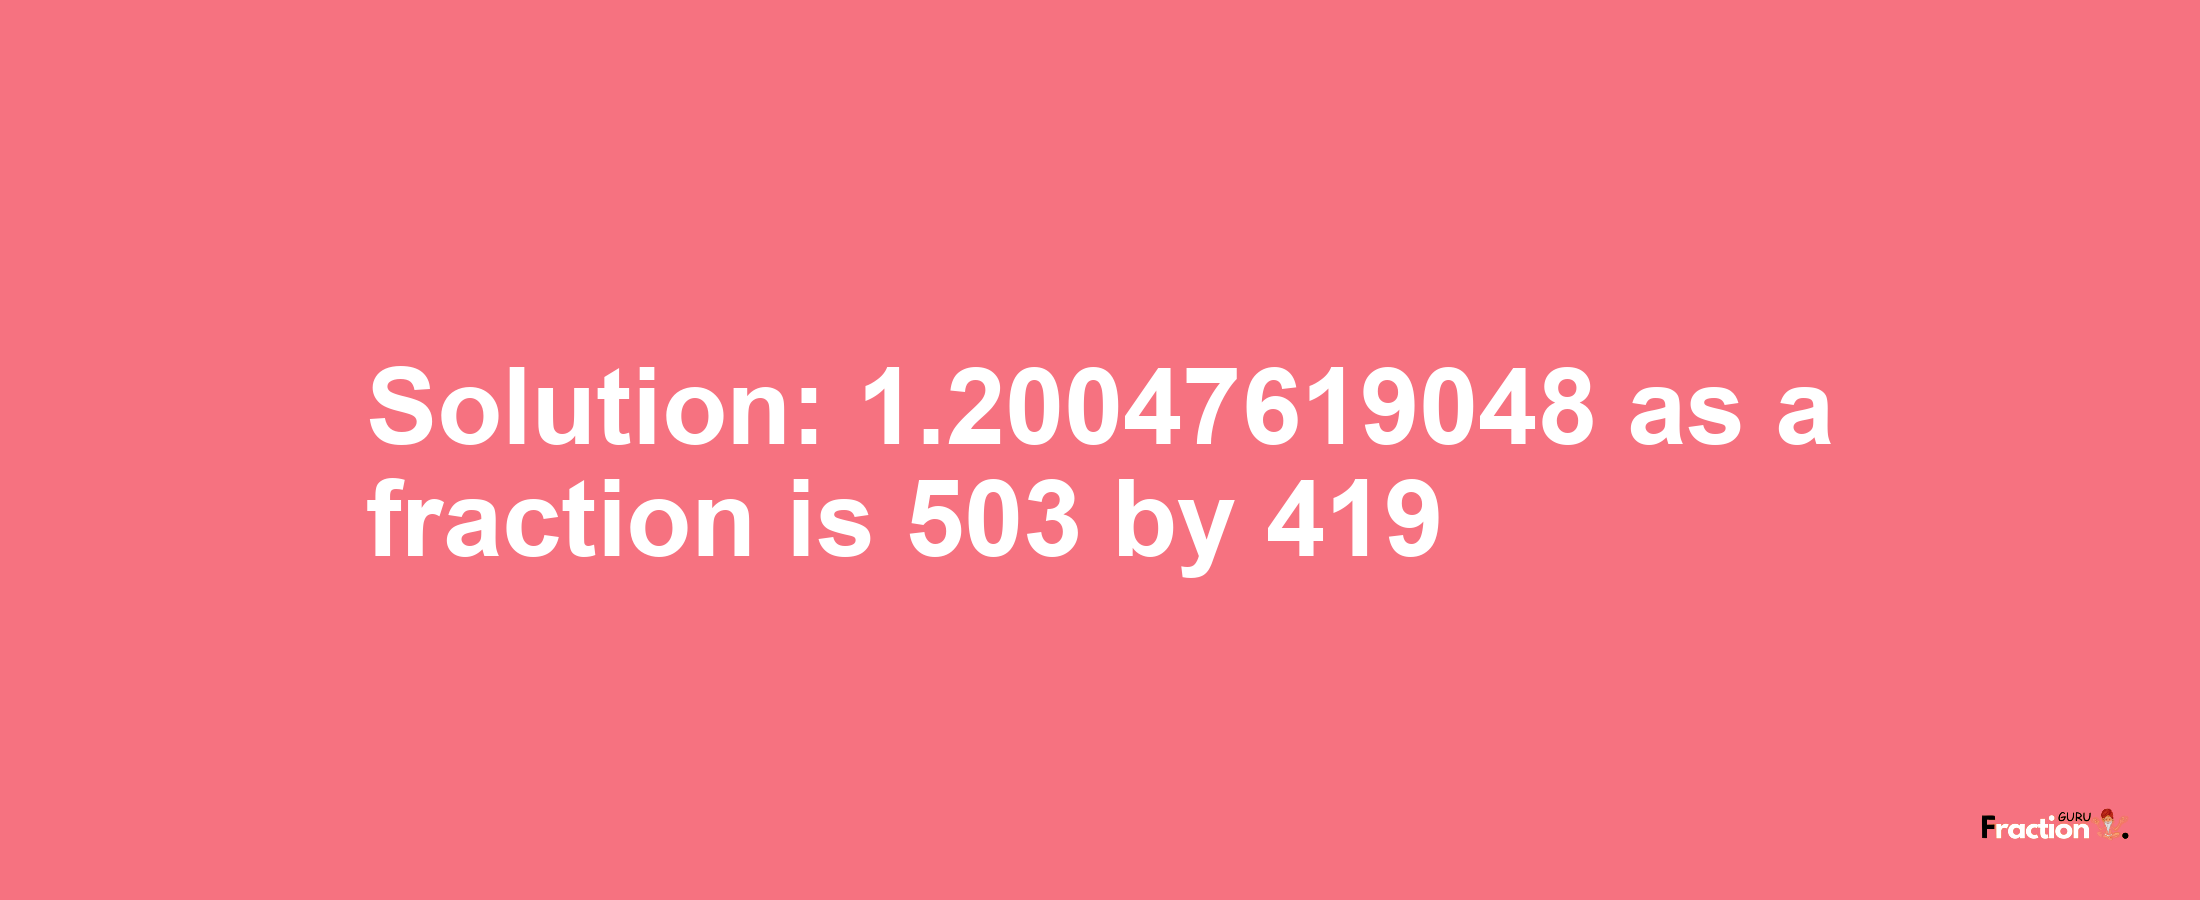 Solution:1.20047619048 as a fraction is 503/419